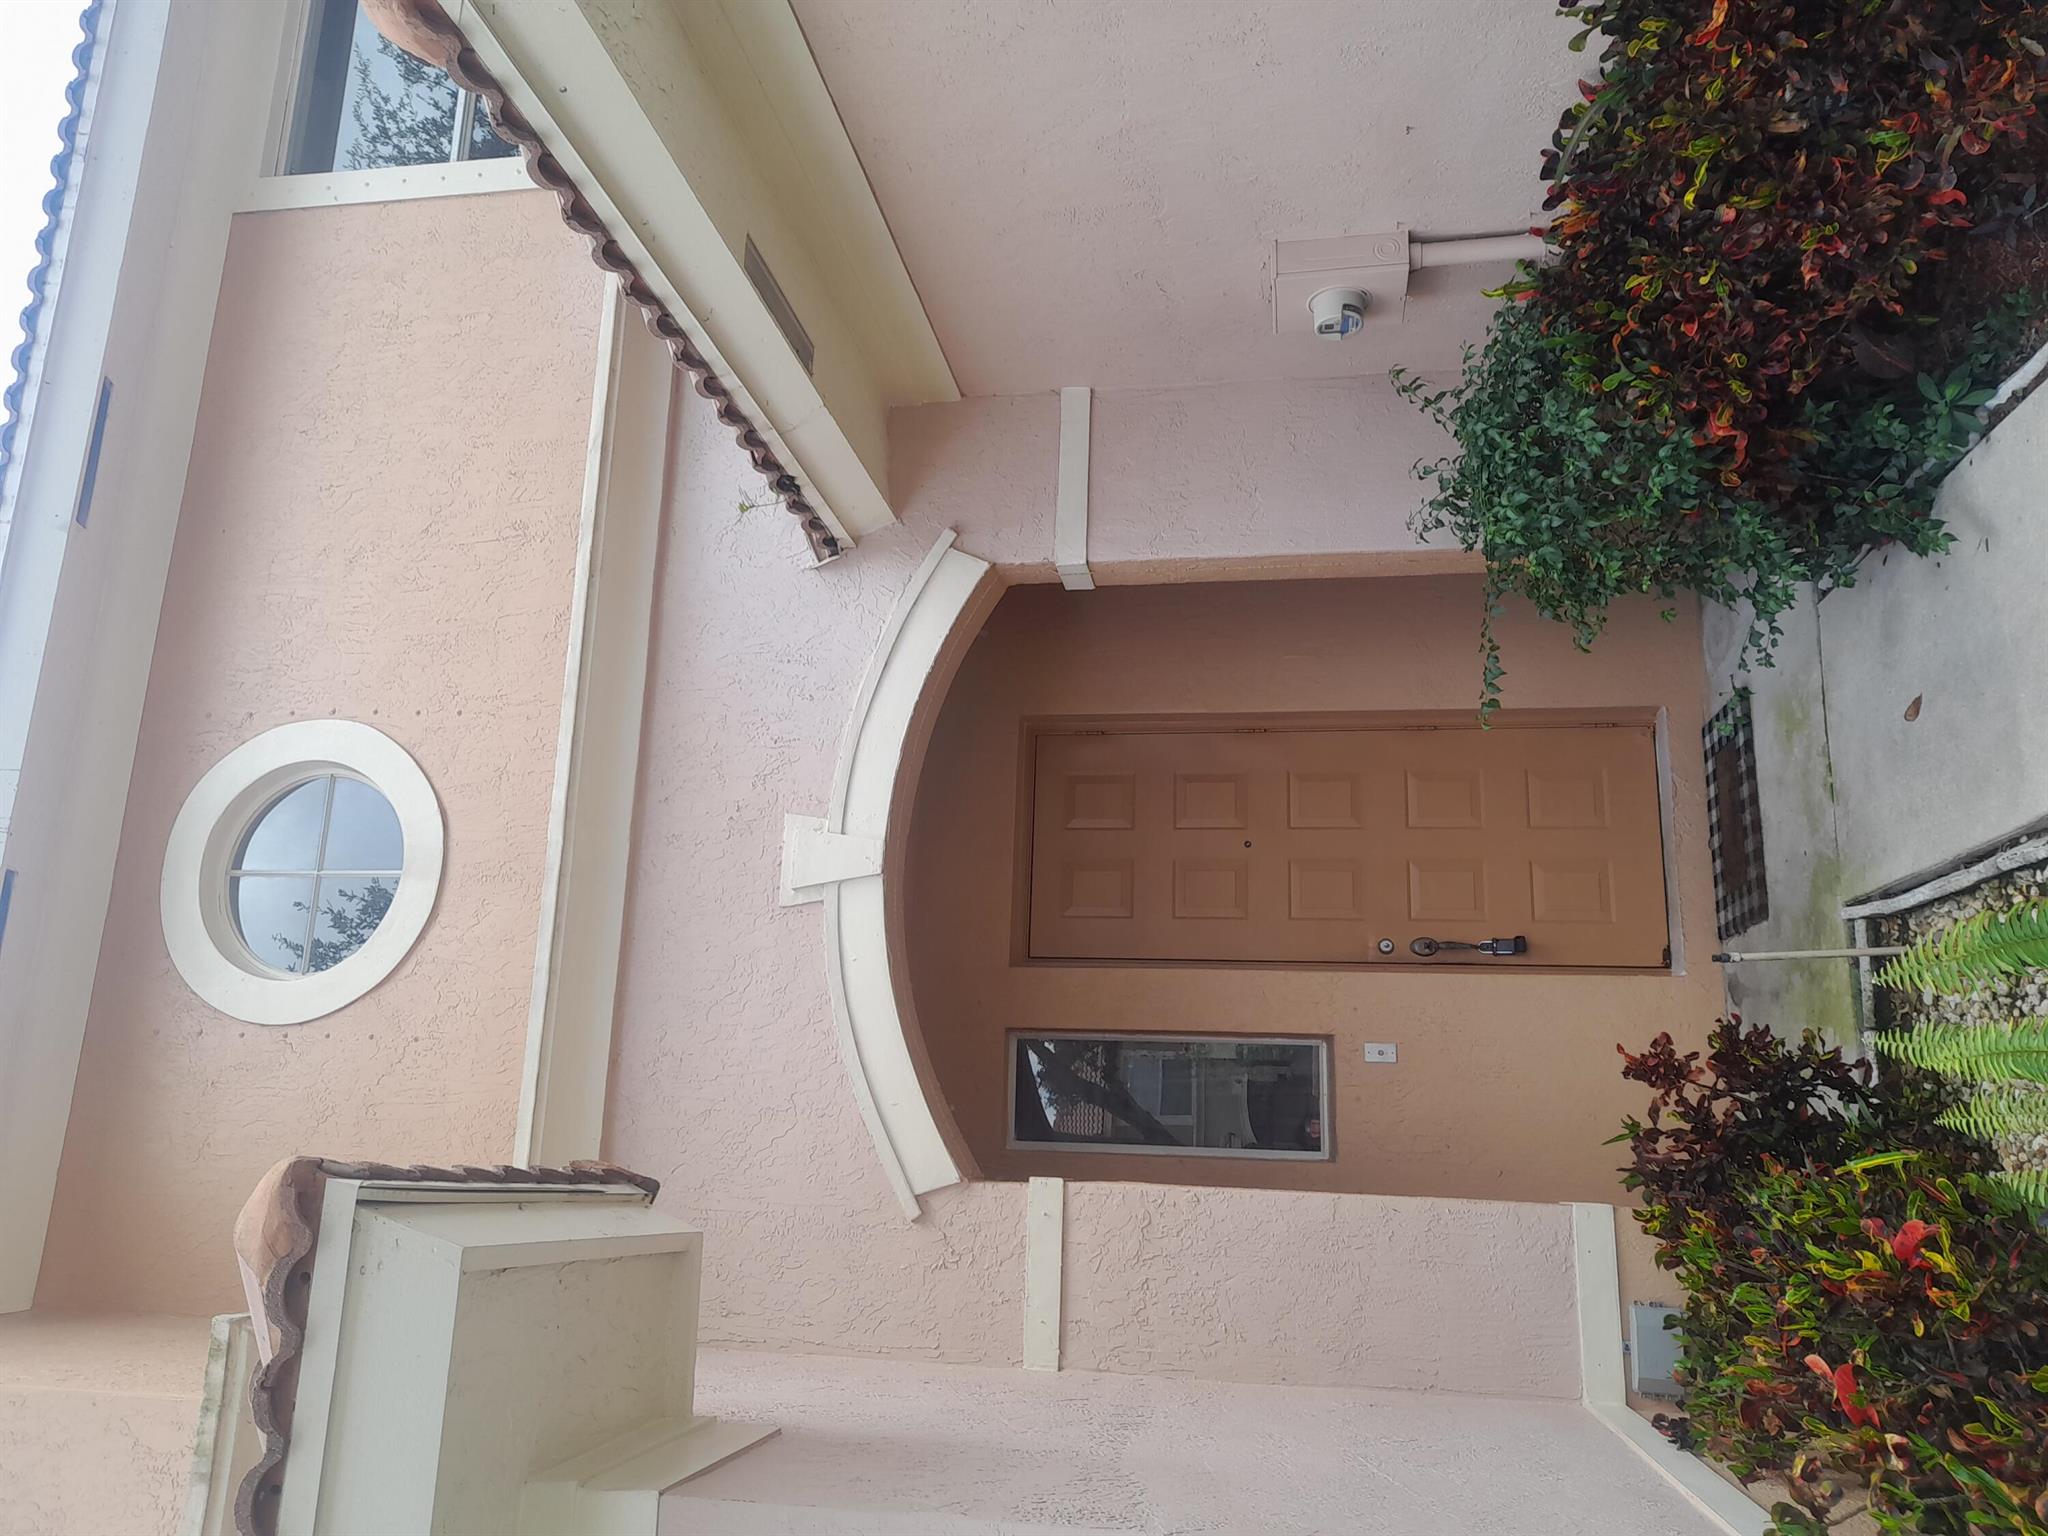 Beautifully 2/2.5 and 1 car garage Town home, separate laundry on the 2nd floor, highly in demand subdivision in the center of all you could wish for!!!Shopping, restaurants, close to Waterpark, Schools, South Florida Fair grounds, easy access to major international airport-Gated community -Pool- and other great amenities. There are 2 neighborhood pools, basketball court, 2 play areas, and easy walk to Calypso Bay Waterpark. Amazing location in the heart of Royal Palm Beach.